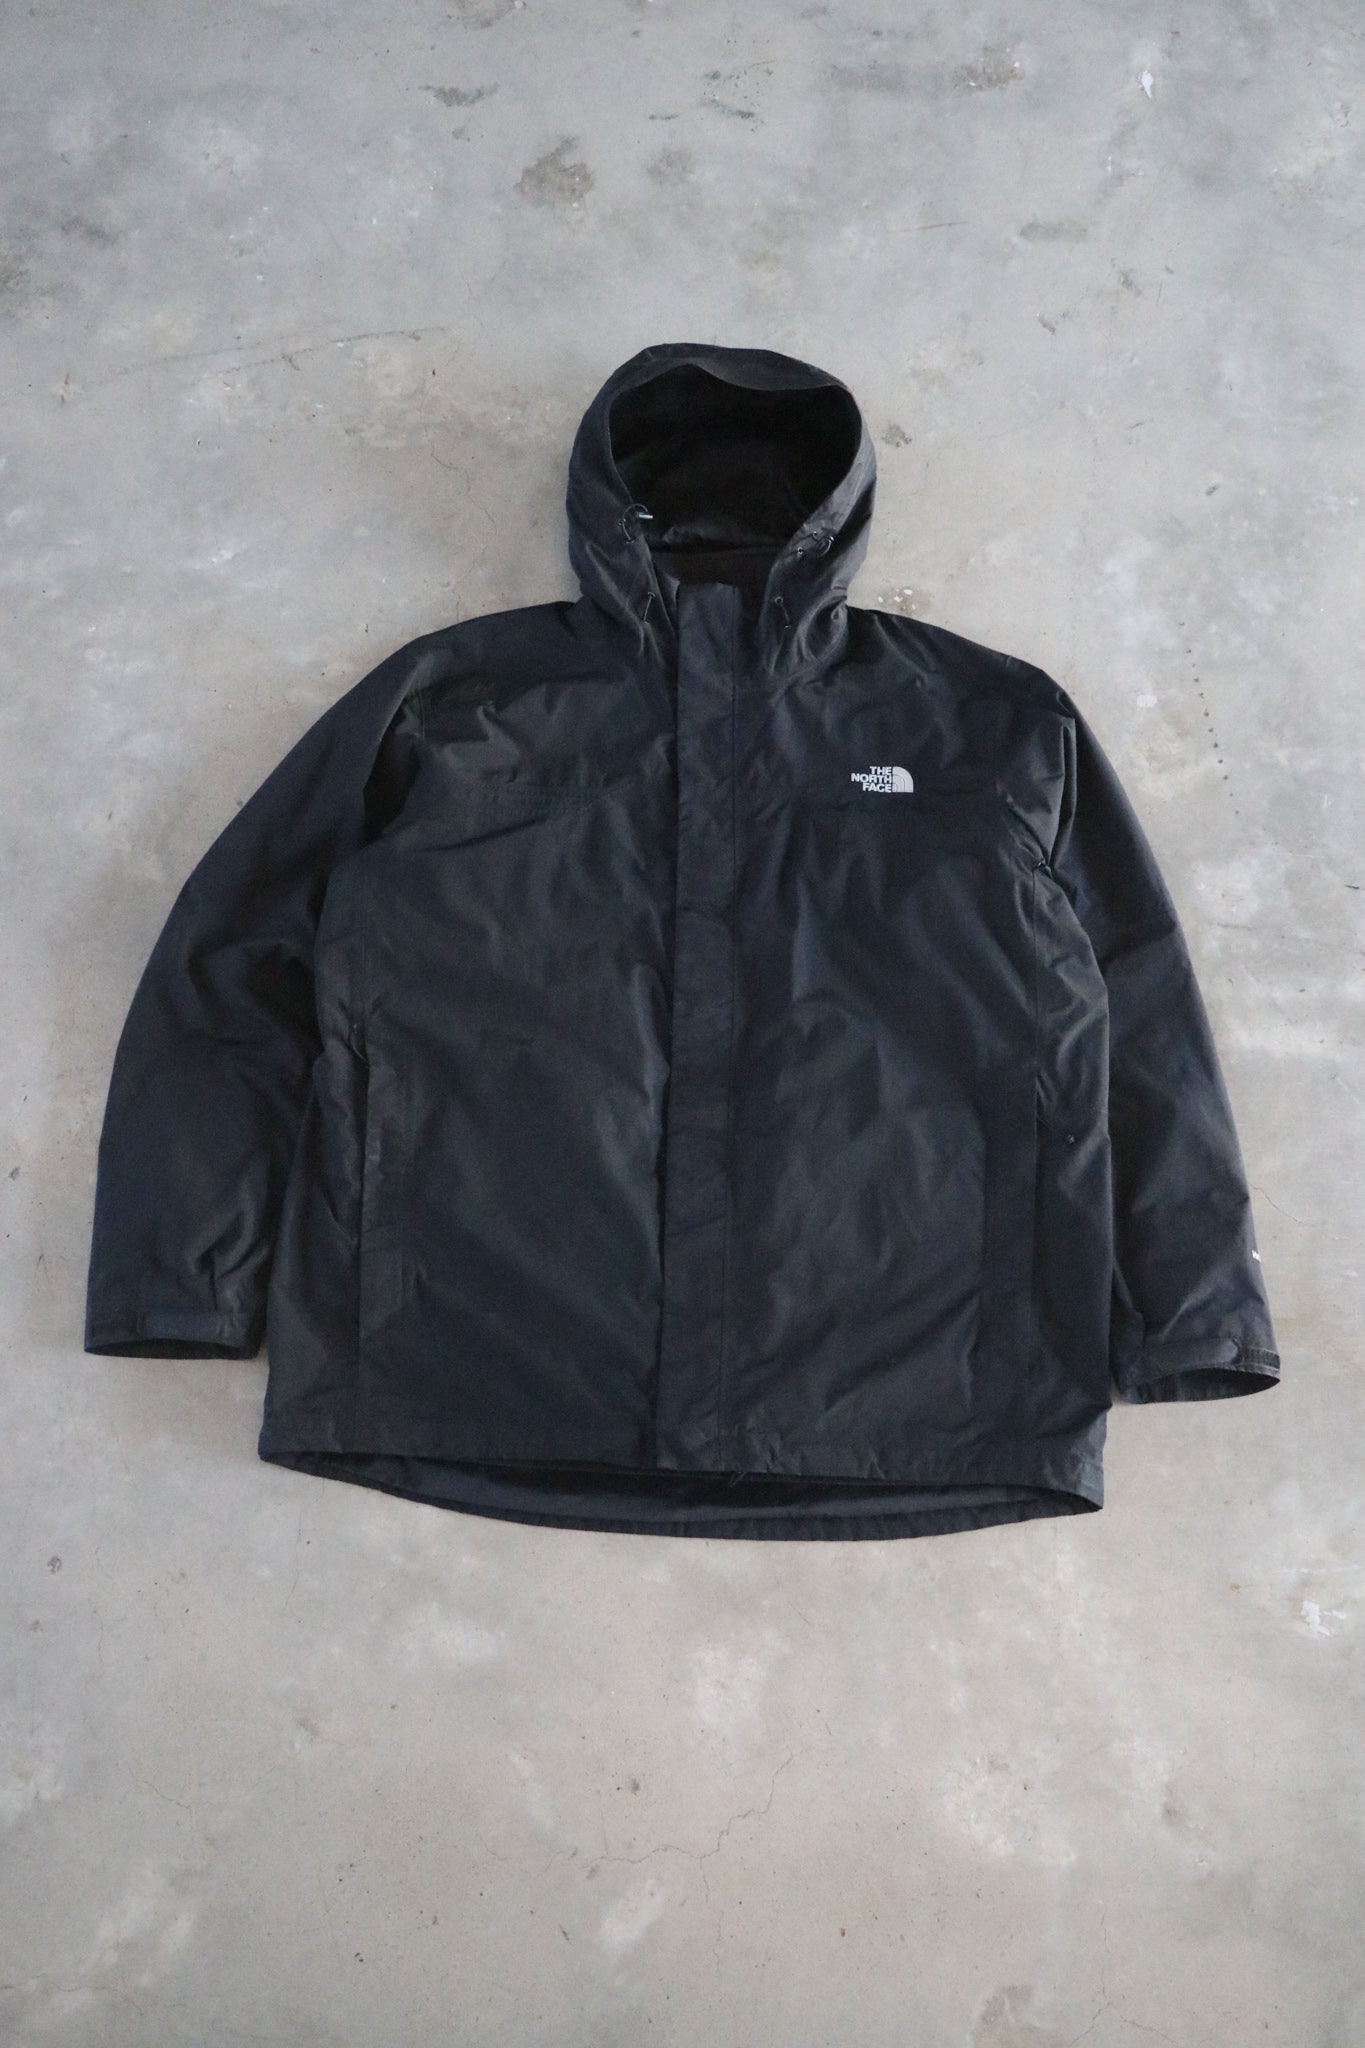 Vintage The North Face Jacket 2 in 1 Jacket XL